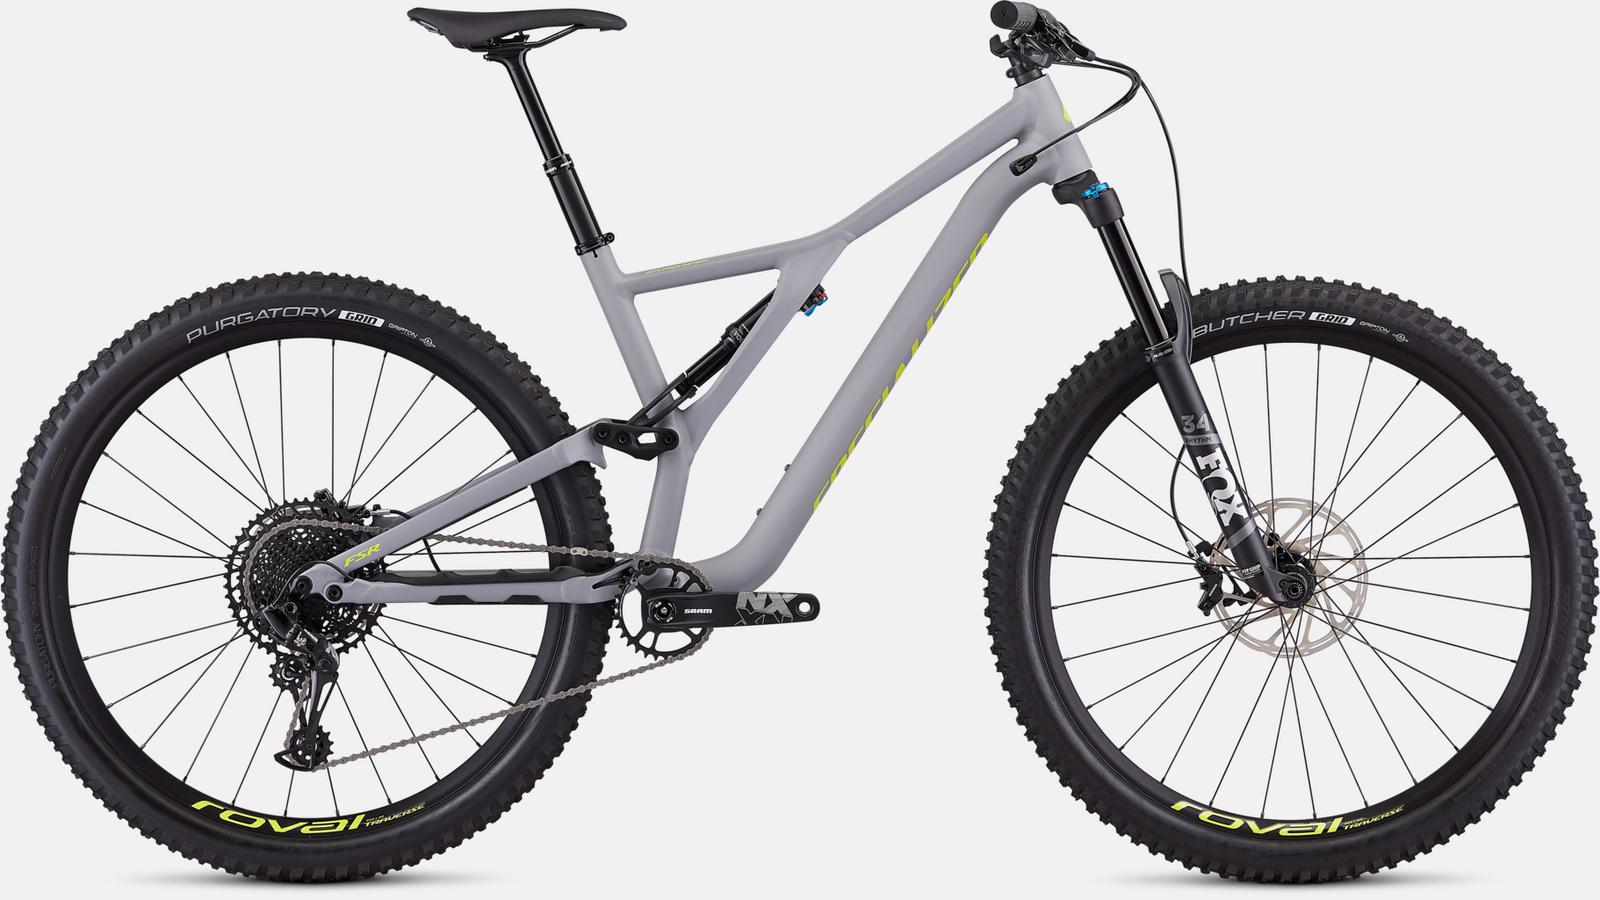 Paint for 2019 Specialized Men's Stumpjumper Comp Alloy 29 - 12-speed - Satin Cool Grey